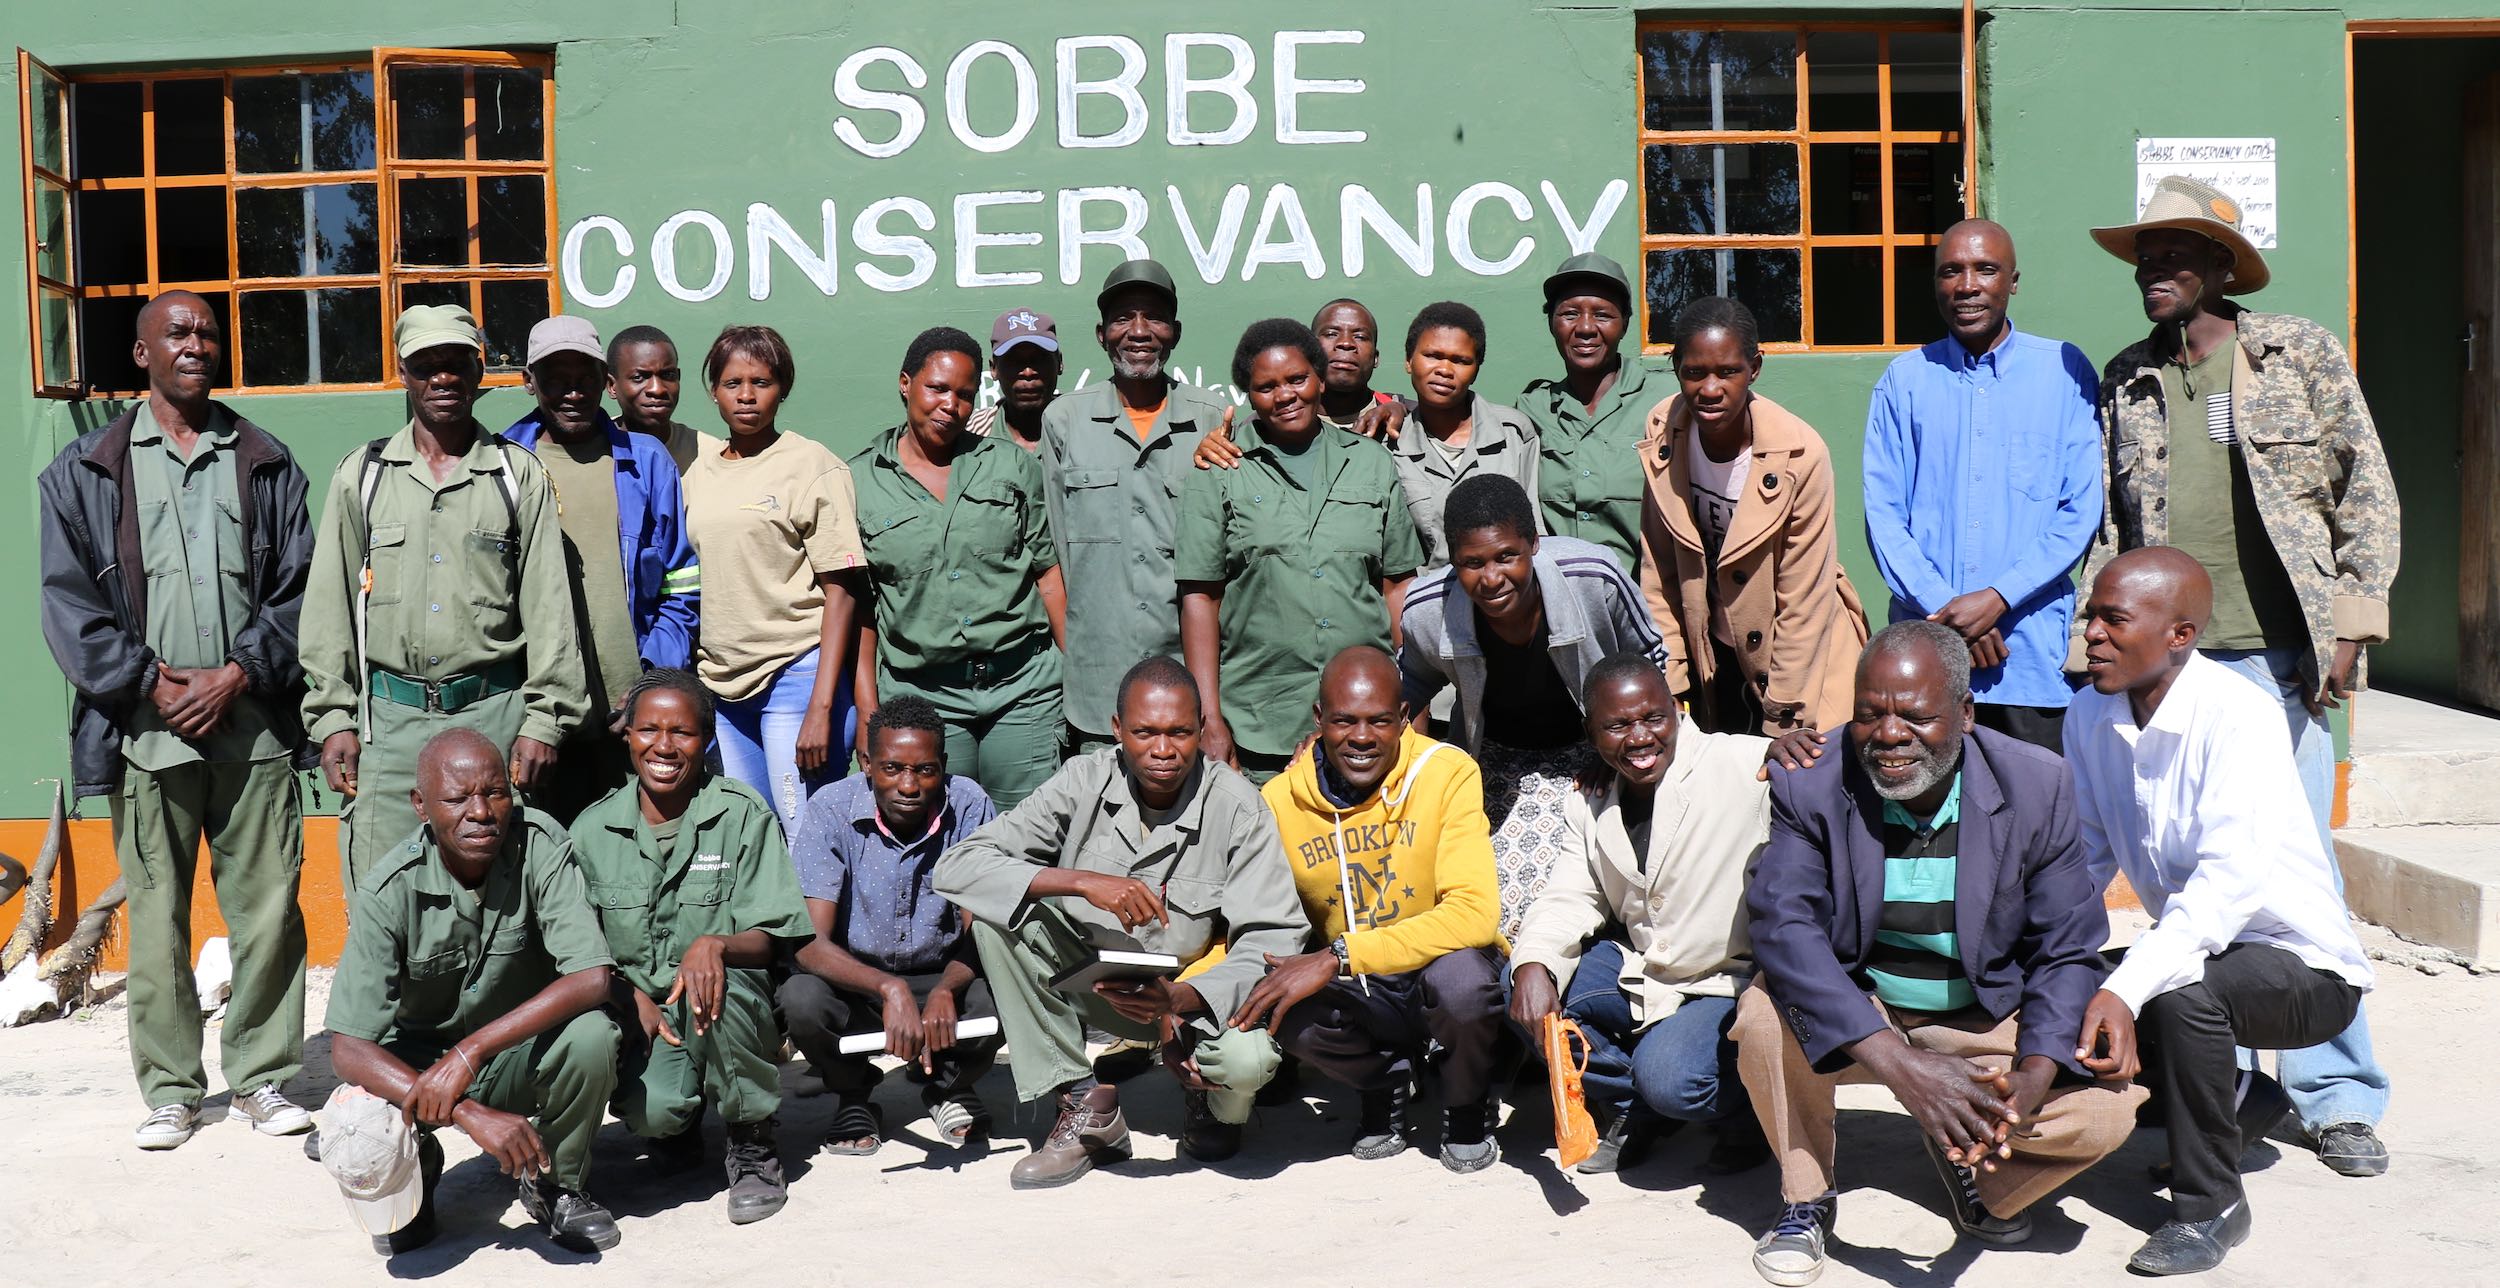 A group of Namibian men and women pose outside a green building.